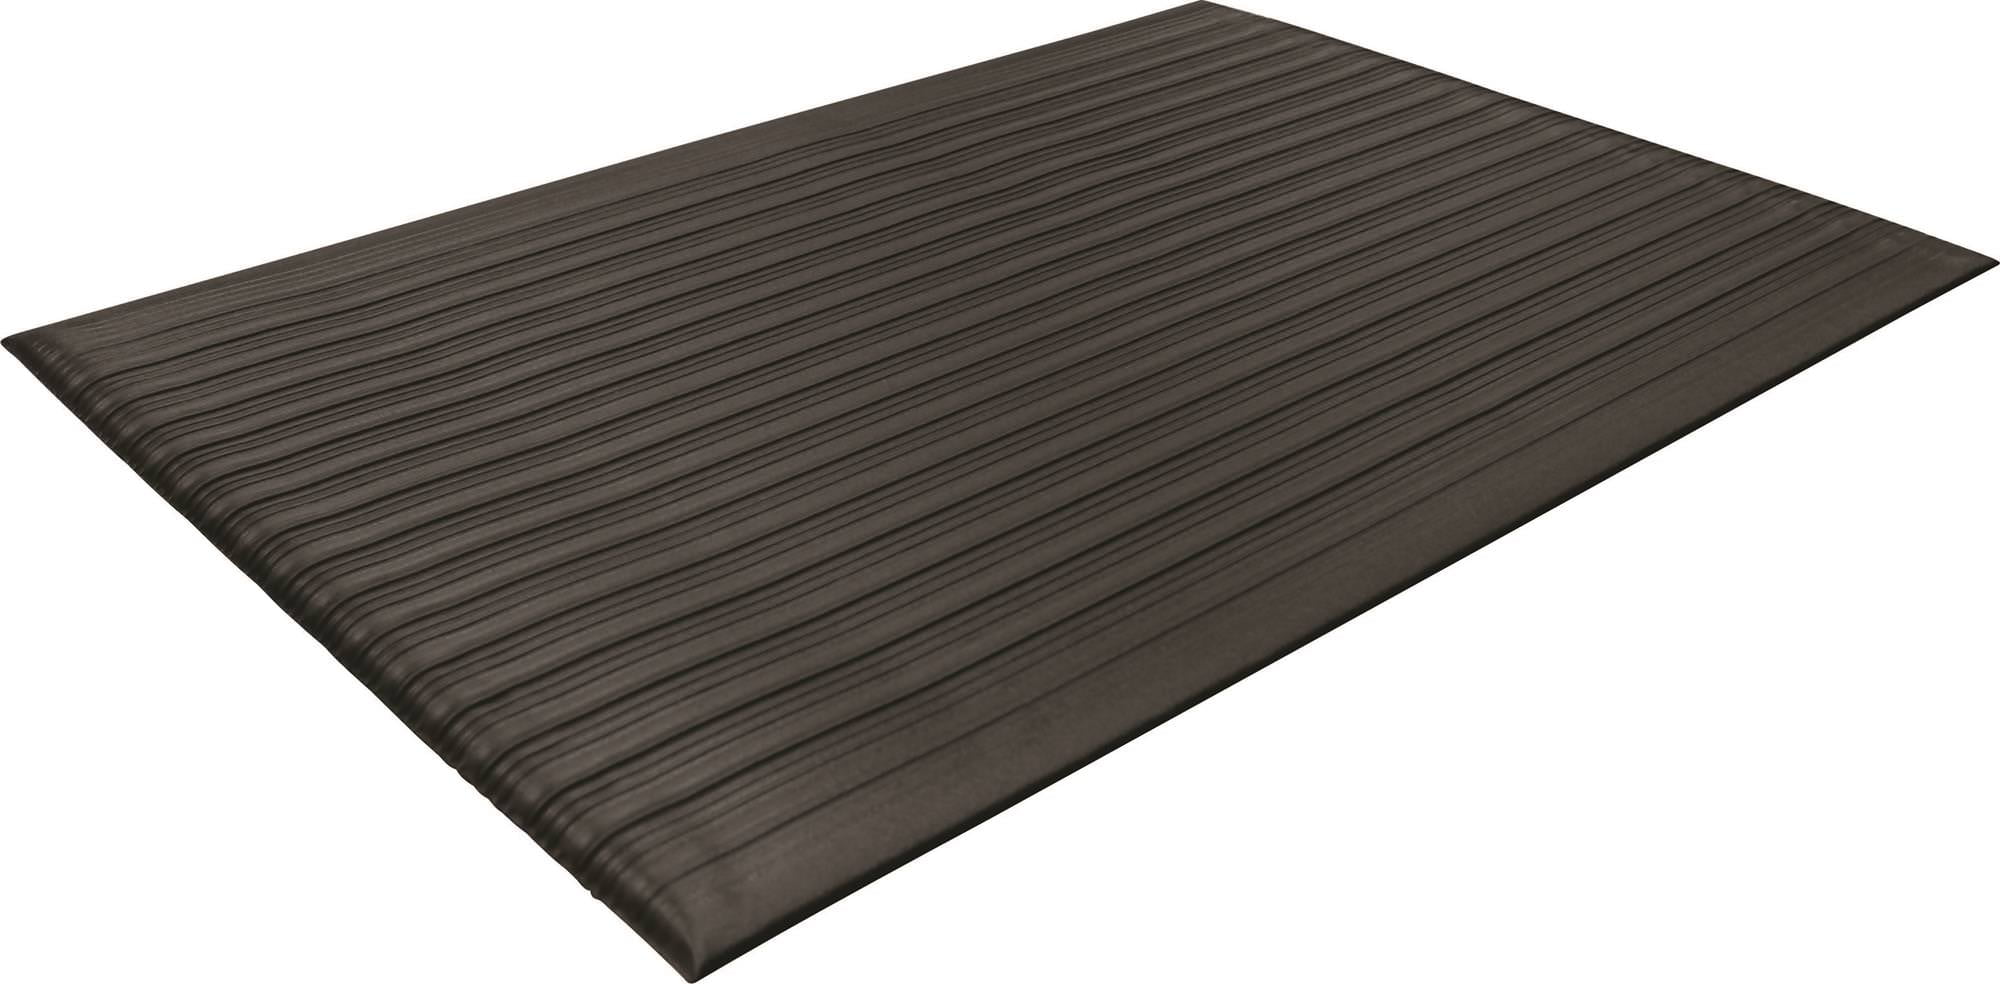 Vinyl Reduces fatigue and discomfort Gray Guardian Air Step Anti-Fatigue Floor Mat Can be easily cut to fit any space 4x60 